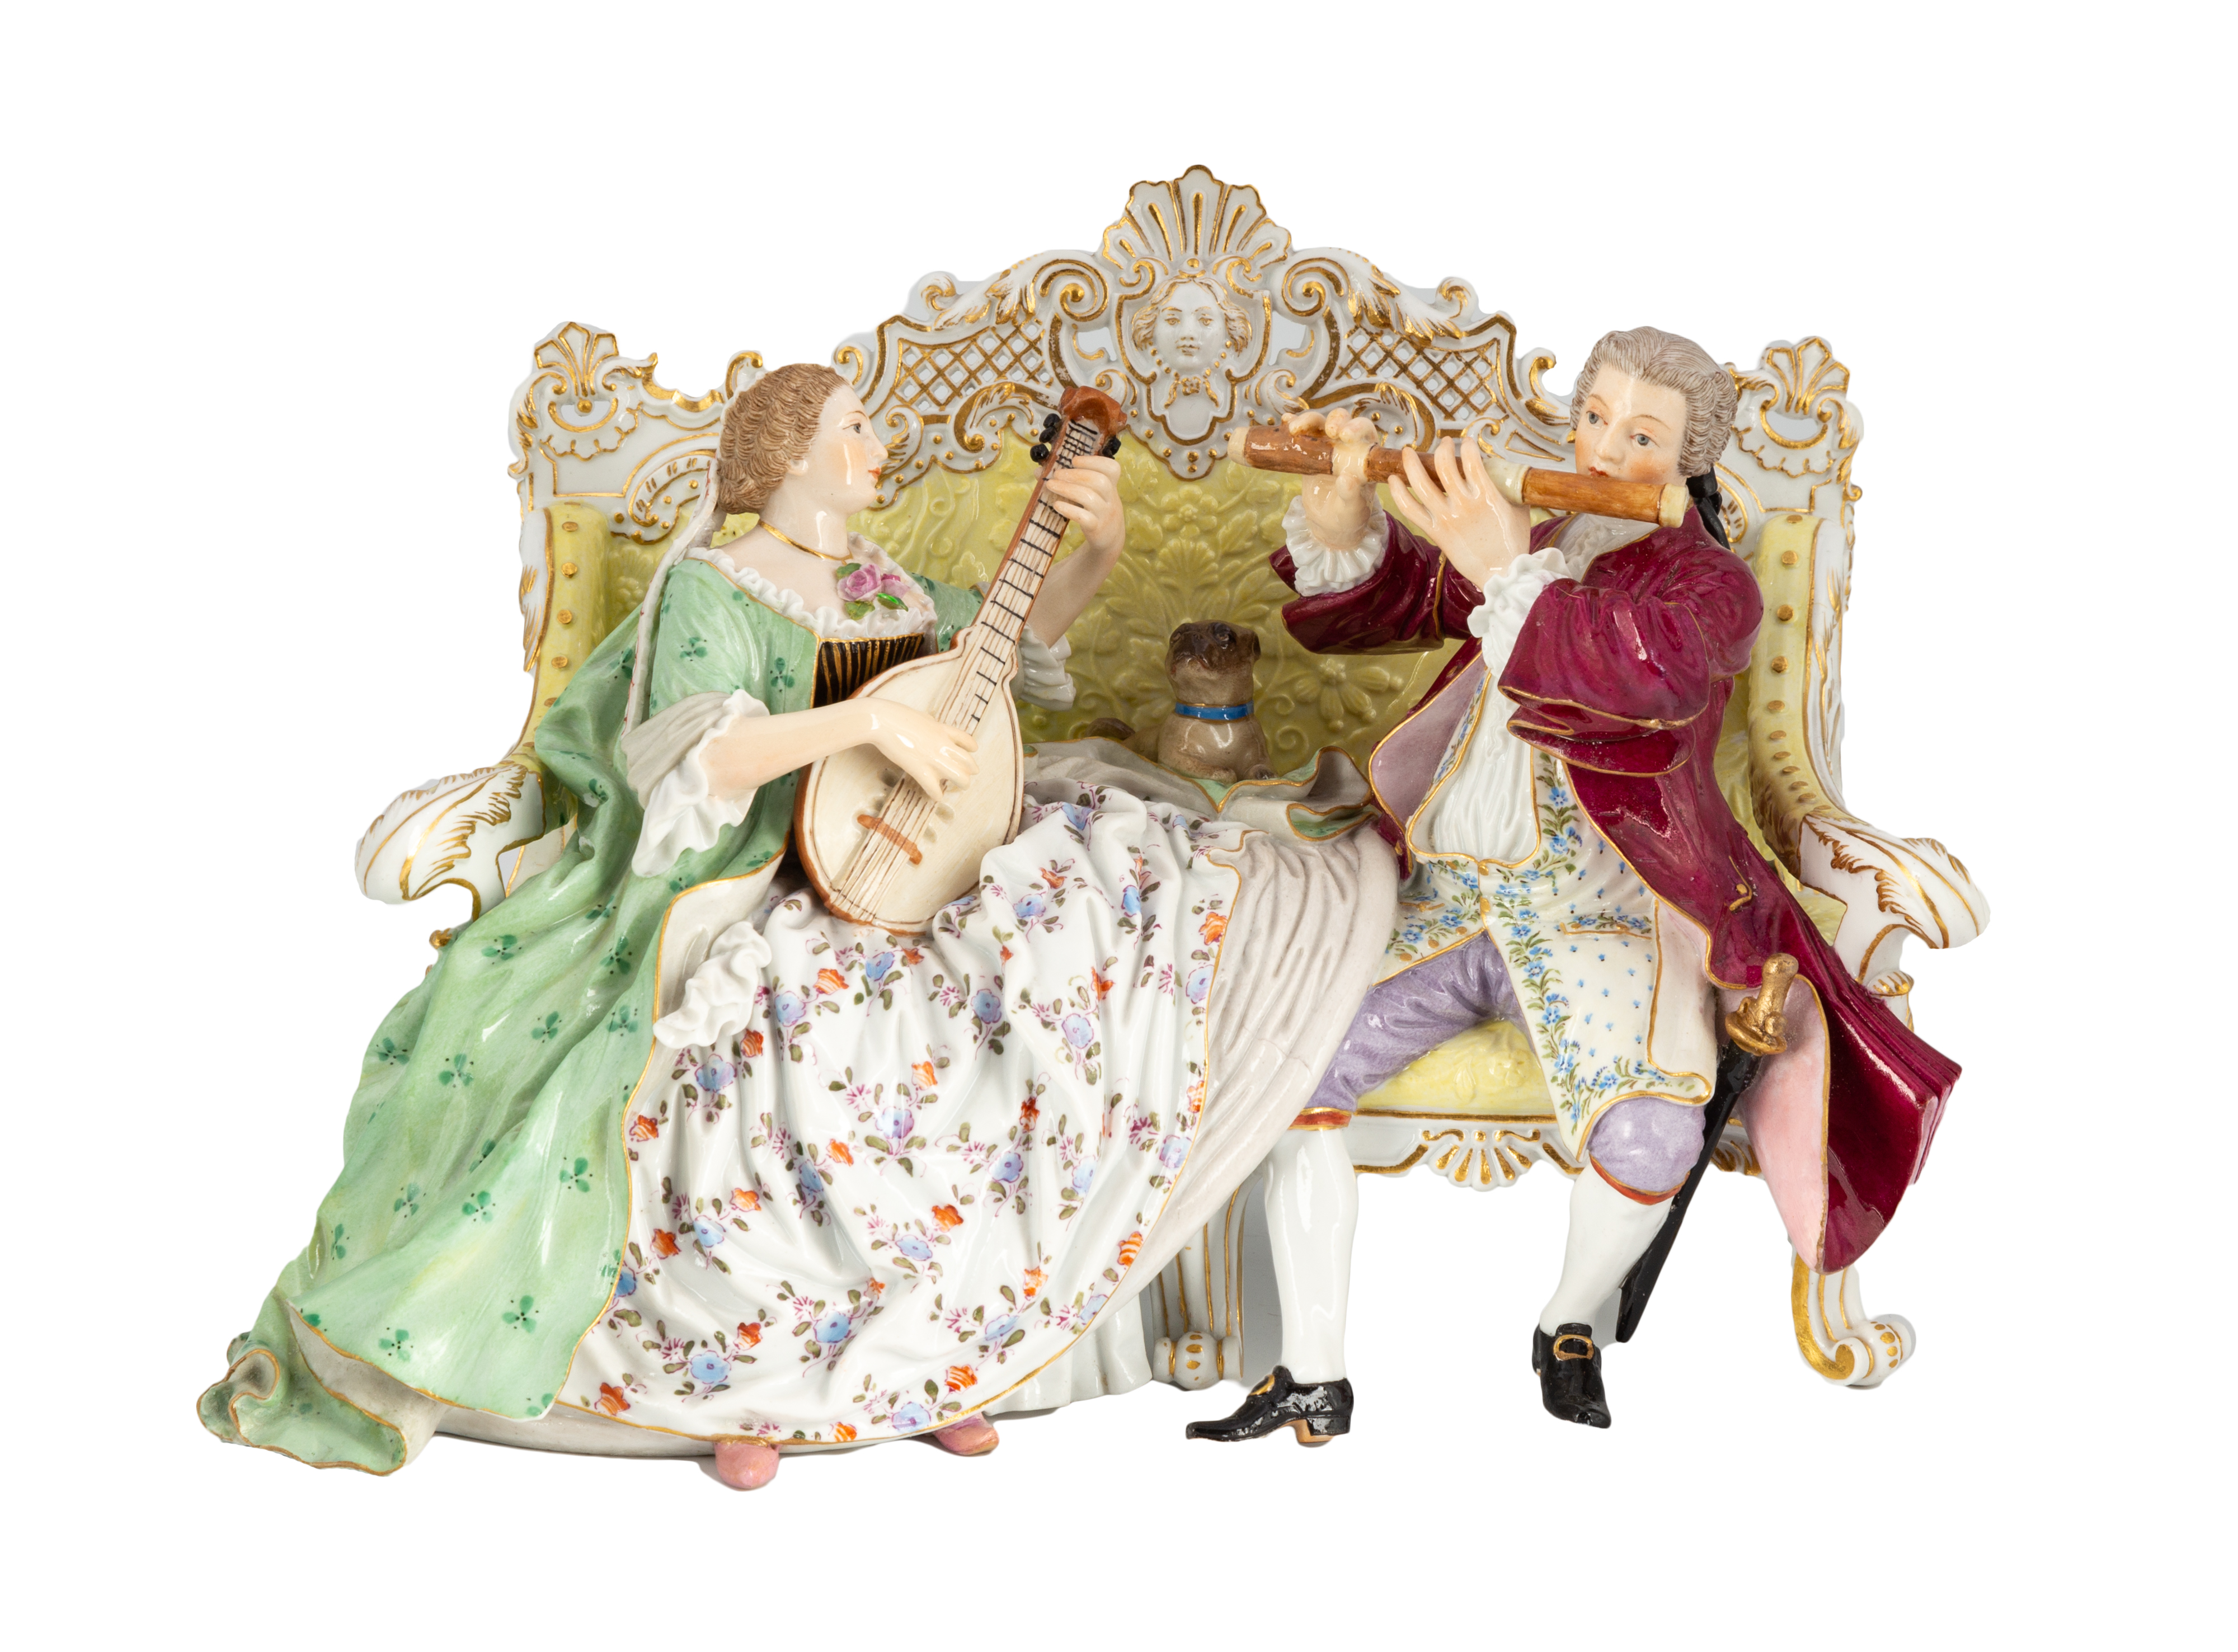 MEISSEN FIGURINE OF A MAN AND WOMAN 2c8667